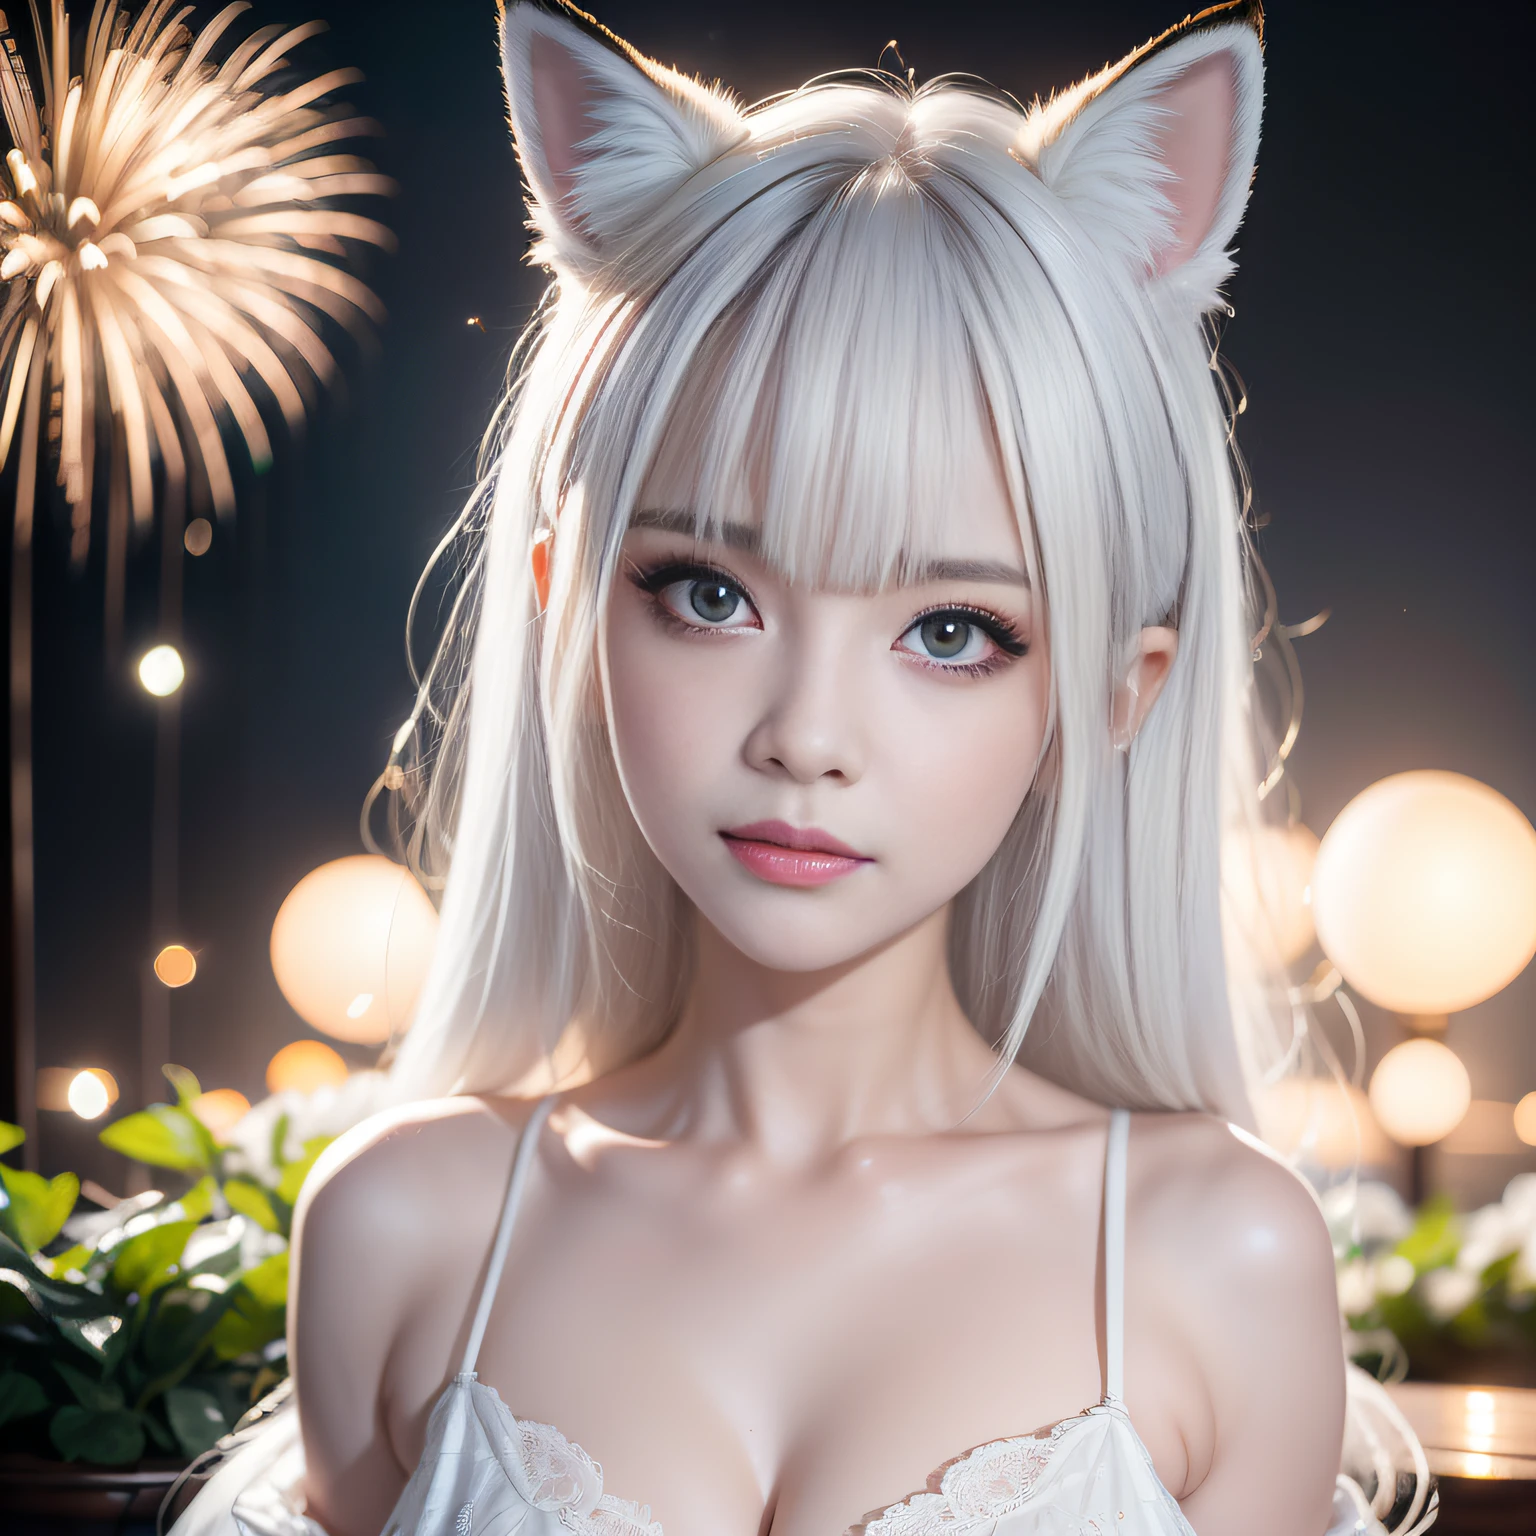 Fox demon fox ears white haired girl，Overlooking the night view of Chang'an，Delicate pupils，Sexy and feminine，Sit Pose，fluffy fox ears，fox tails，Big sparkling sapphire eyes，No ears，Reddish tone，Gorgeous fireworks background，Pink floral maxi dress，A beauty with only fox earedium boob，Fox eyes，Enchanted，Charming，16K， best qualityer， tmasterpiece， 1womanl， solo， mature， Raised sexy， Highly detailed face and eyes， professional make-up， ，Fox ears white hair girl，Blur at close range，blurryforeground，，Background bokeh，depth of fields，edge lit，long eyelasher，